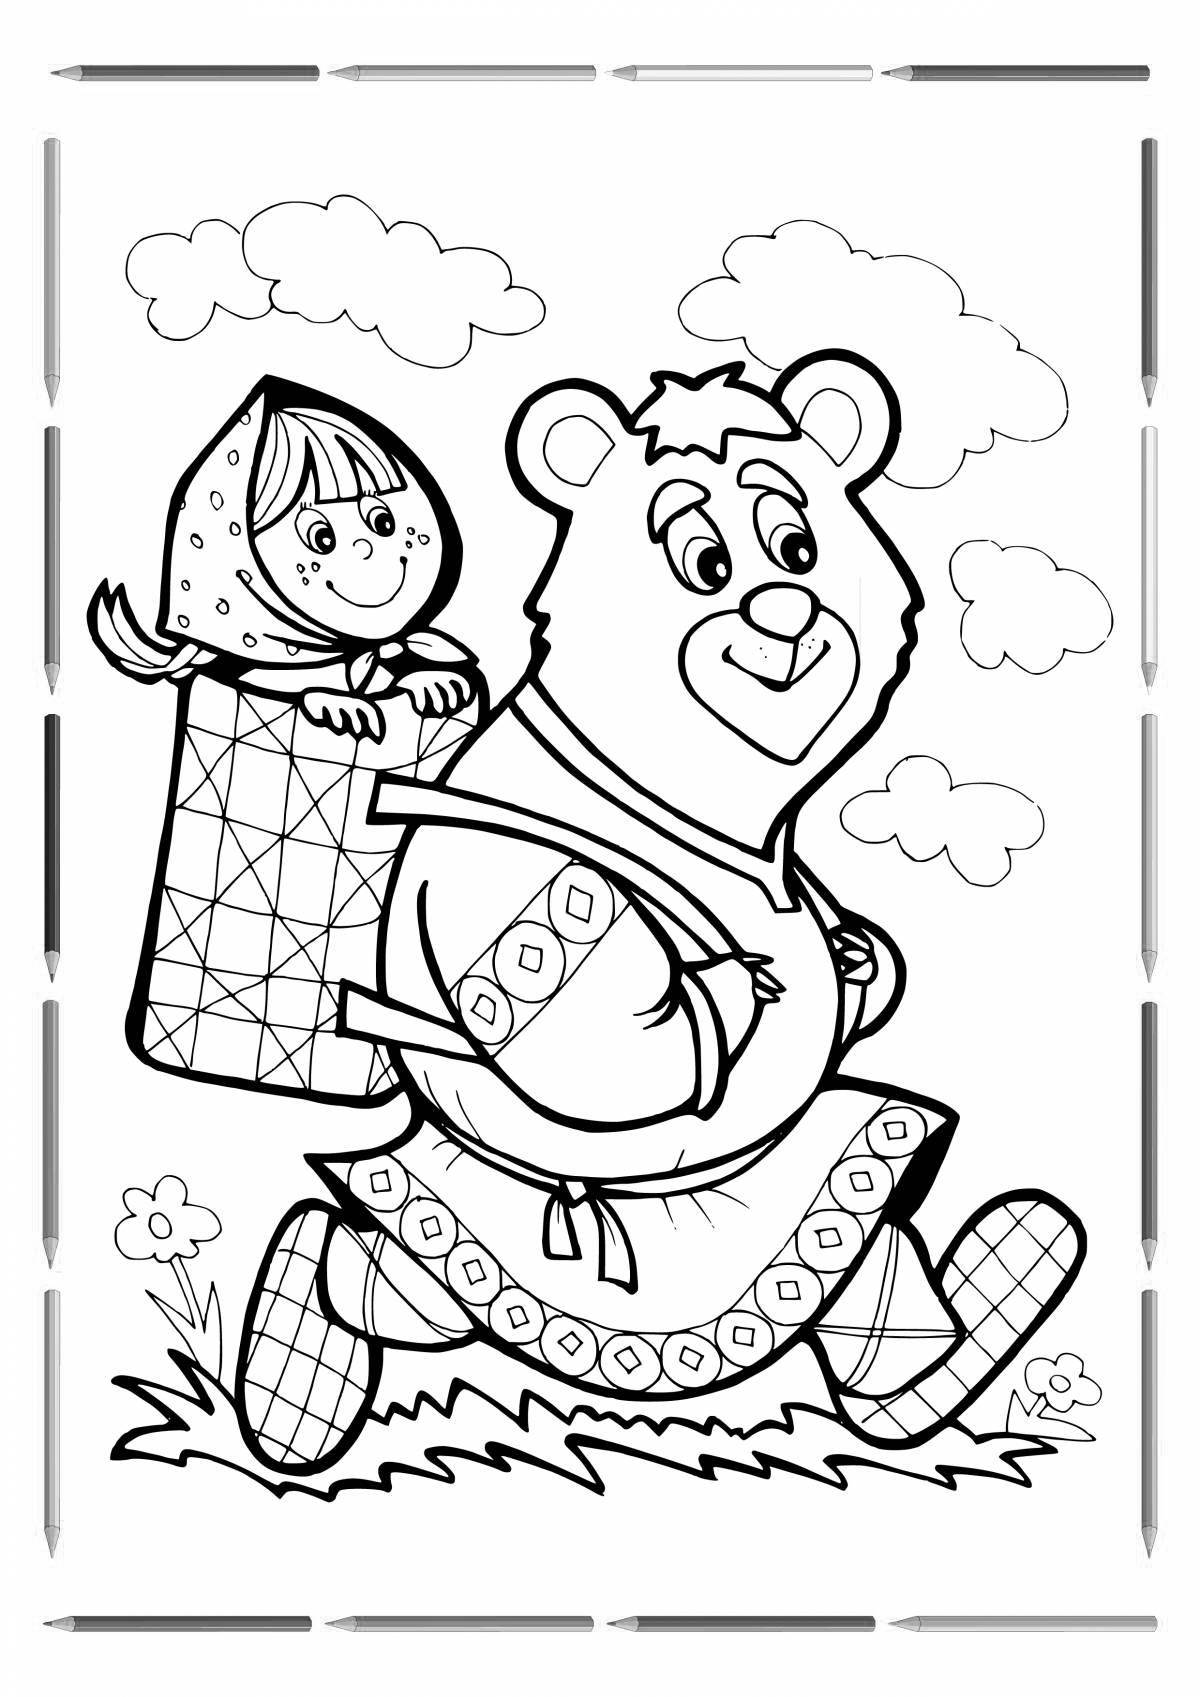 Great fairy tale coloring book for preschoolers